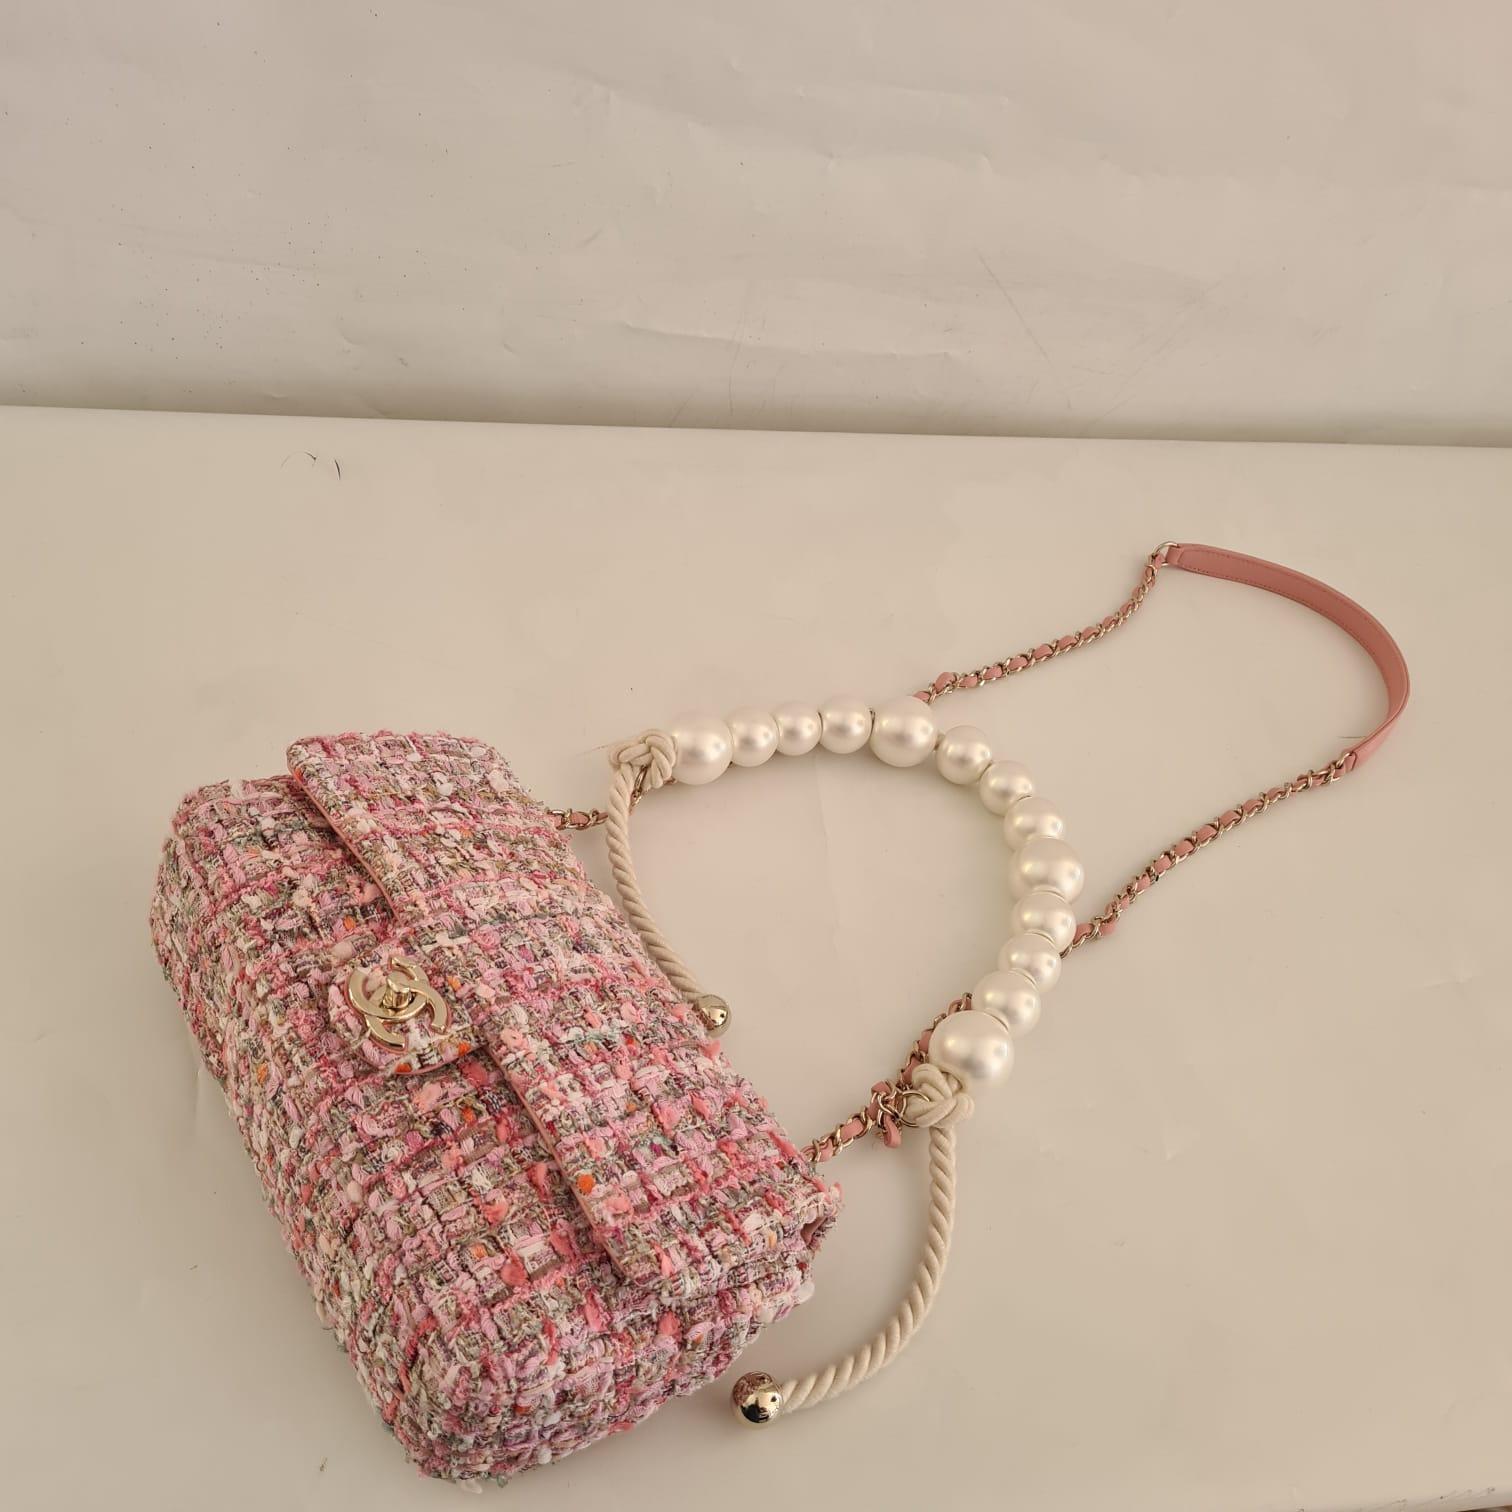 A rare pink tweed flap bag with pearl handle from the by the sea collection. Light pulling on the tweed body but nothing major. Light rubbing on the corners. Pearl details are still in beautiful condition. Series #28. Comes with its card, dust bag